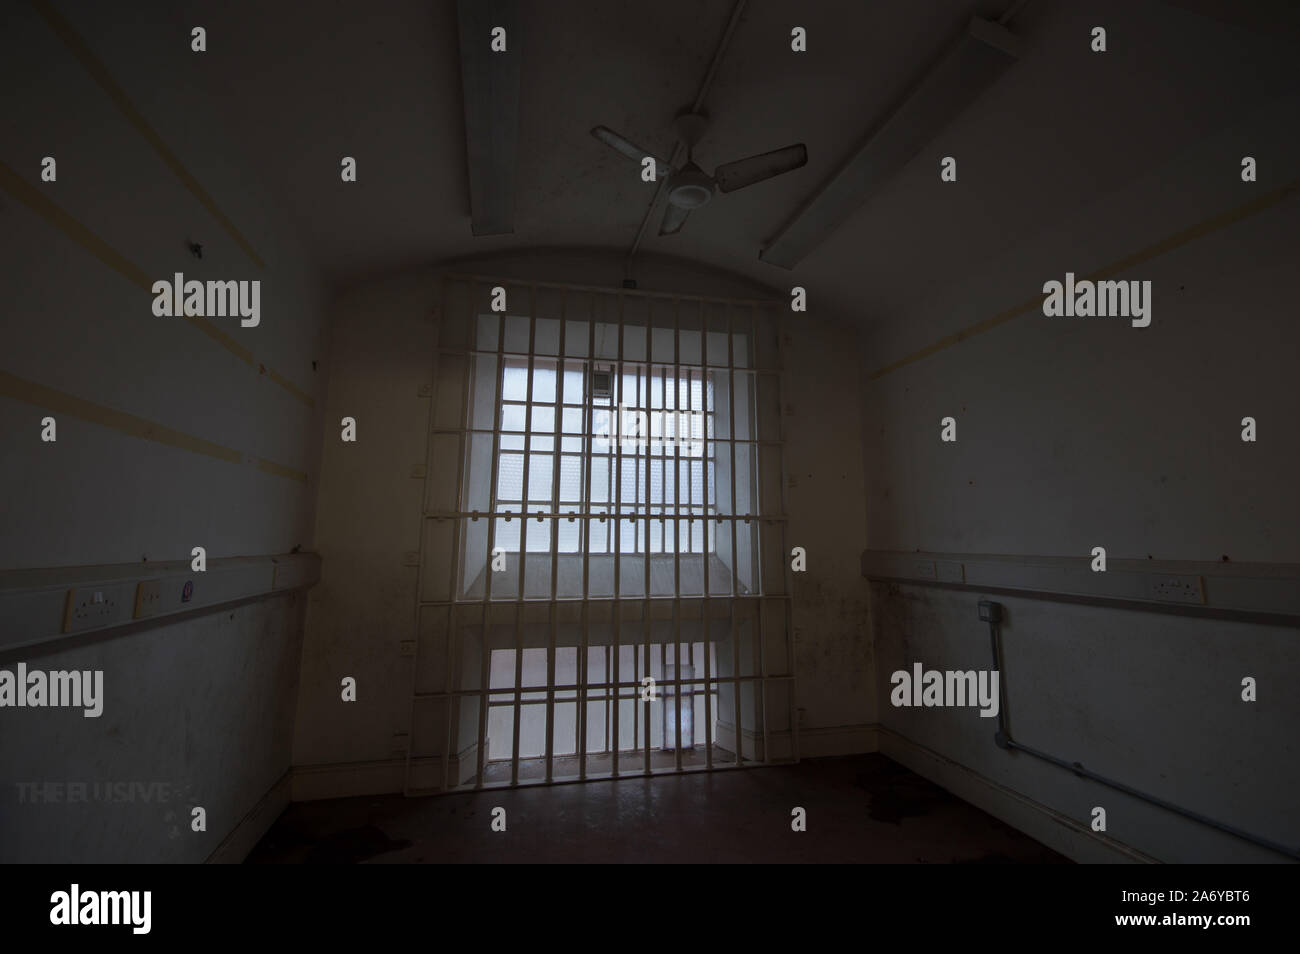 Gloucester Dull Lights Radiates Through The Prison Eerie Photos Of The Uks ‘most Haunted 